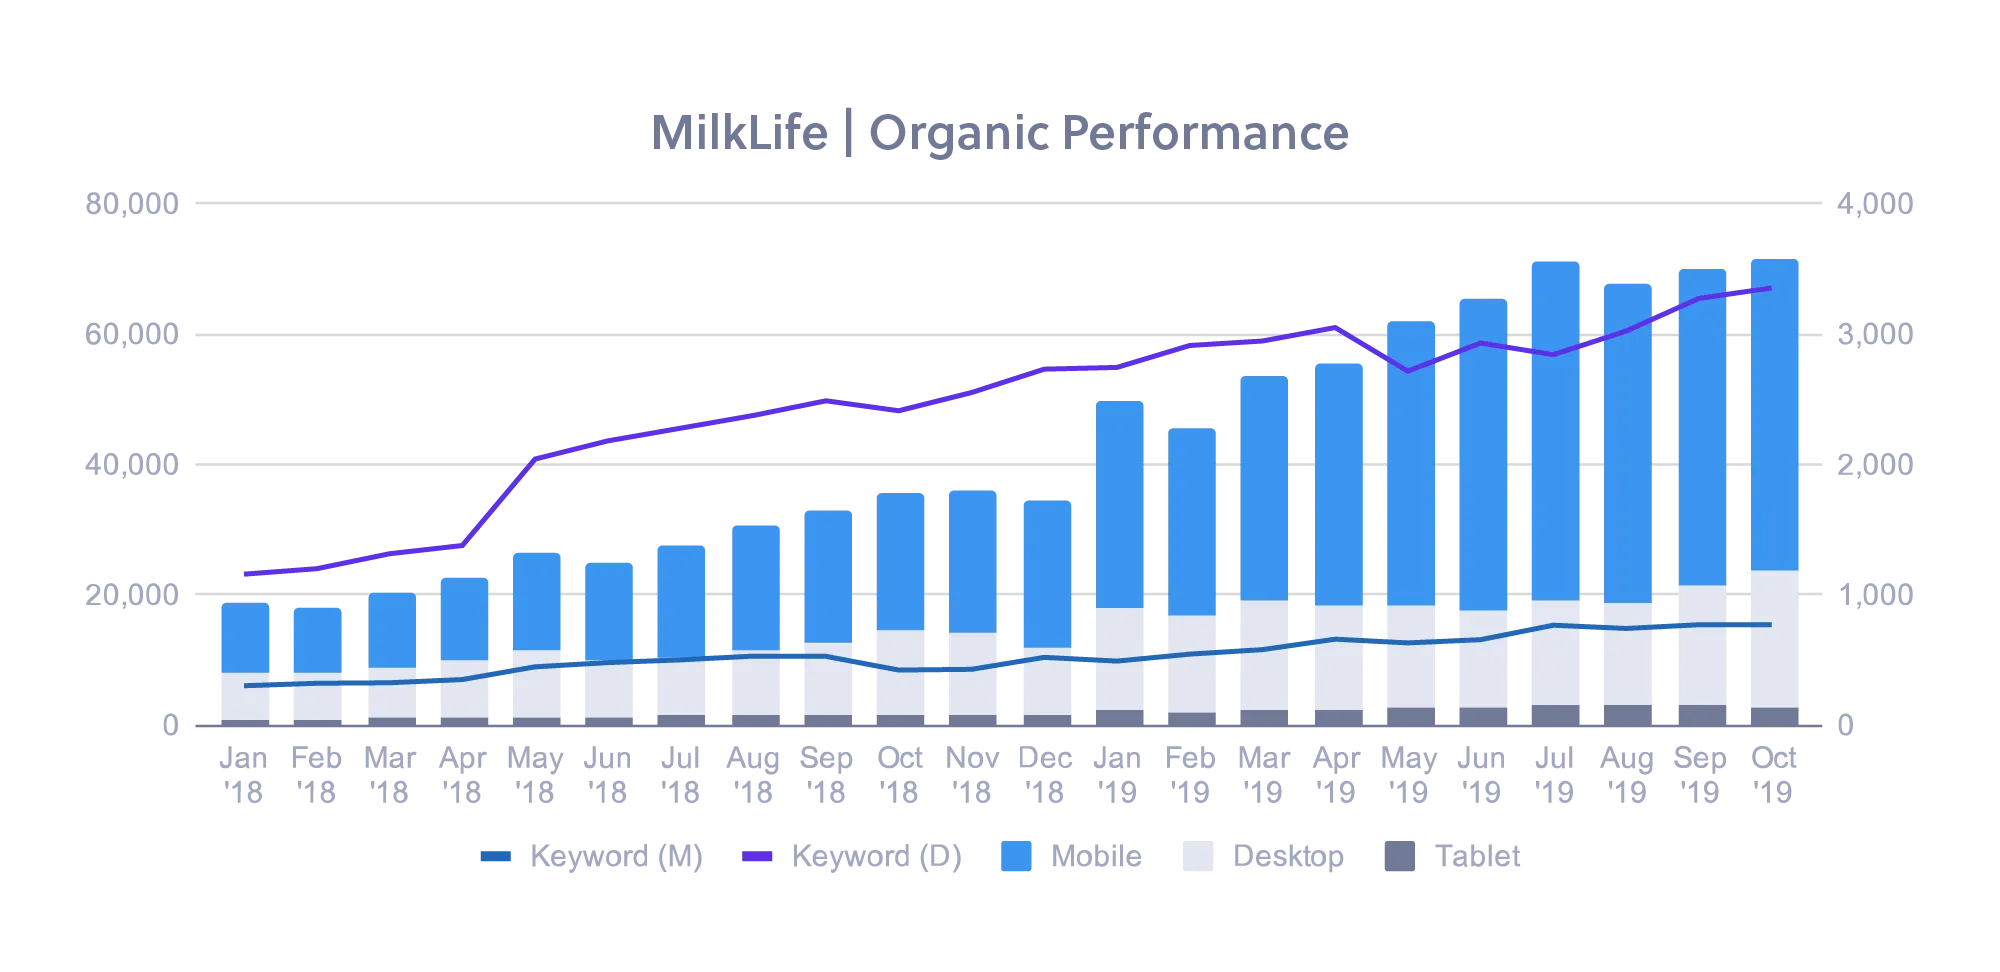 Organic traffic performance over the last two years broken out monthly